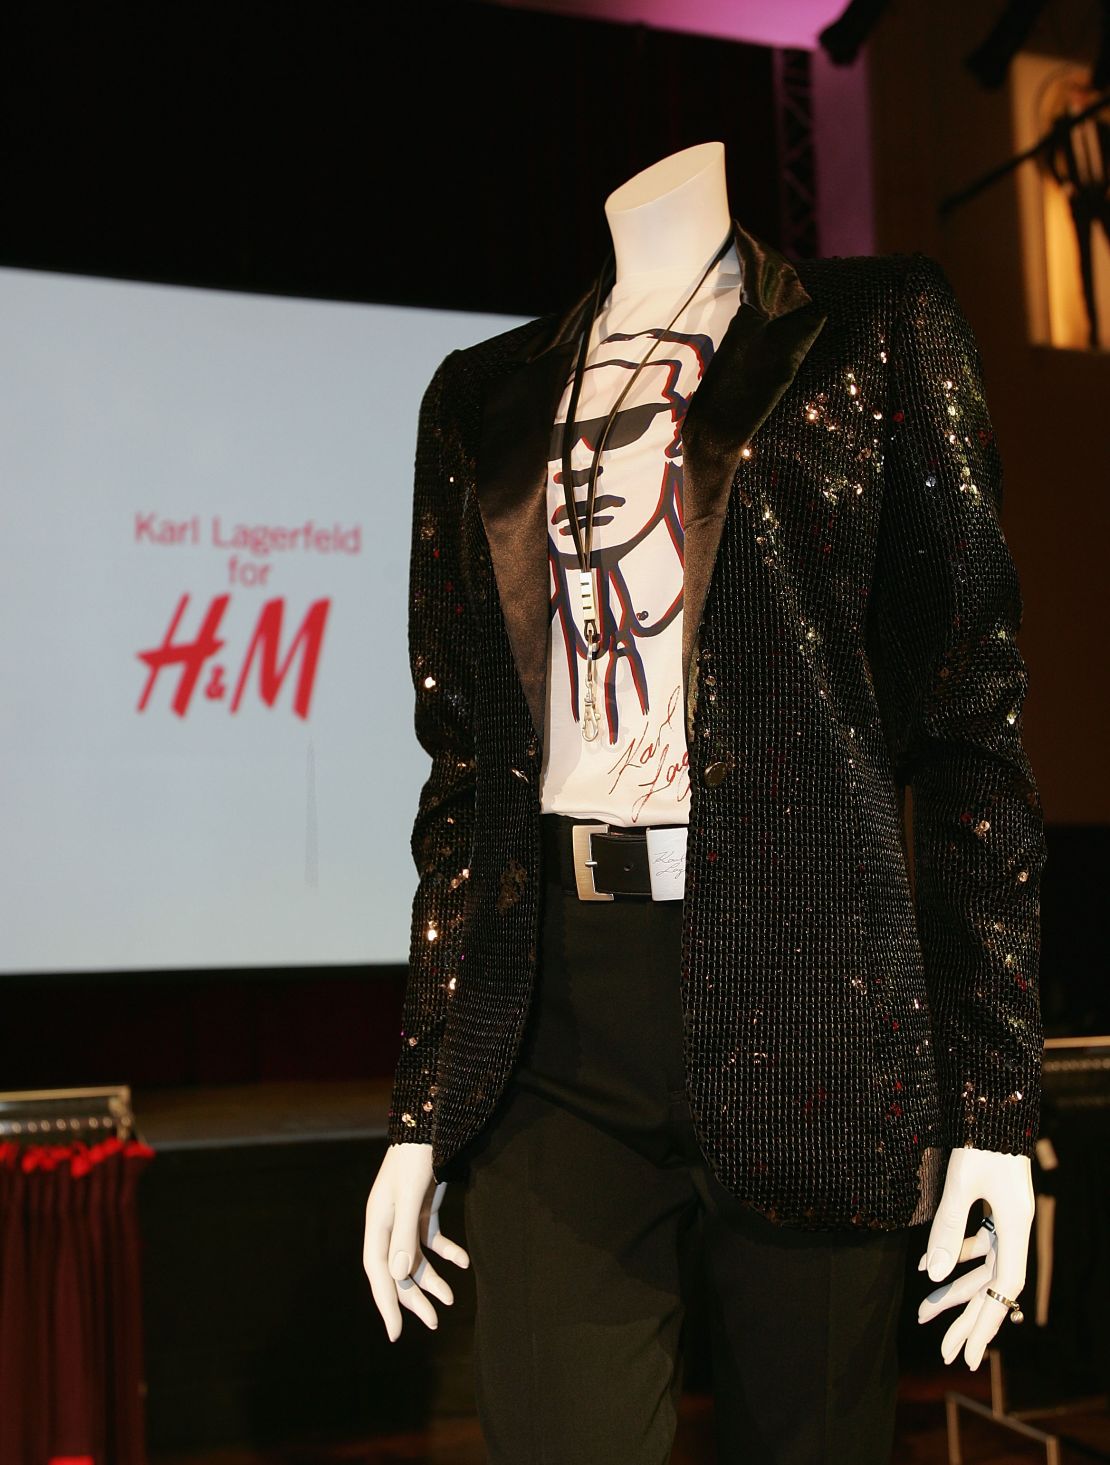 Display of cloths at the launch of Designer Karl Lagerfeld's new collection for high street fashion label H&M in 2004.